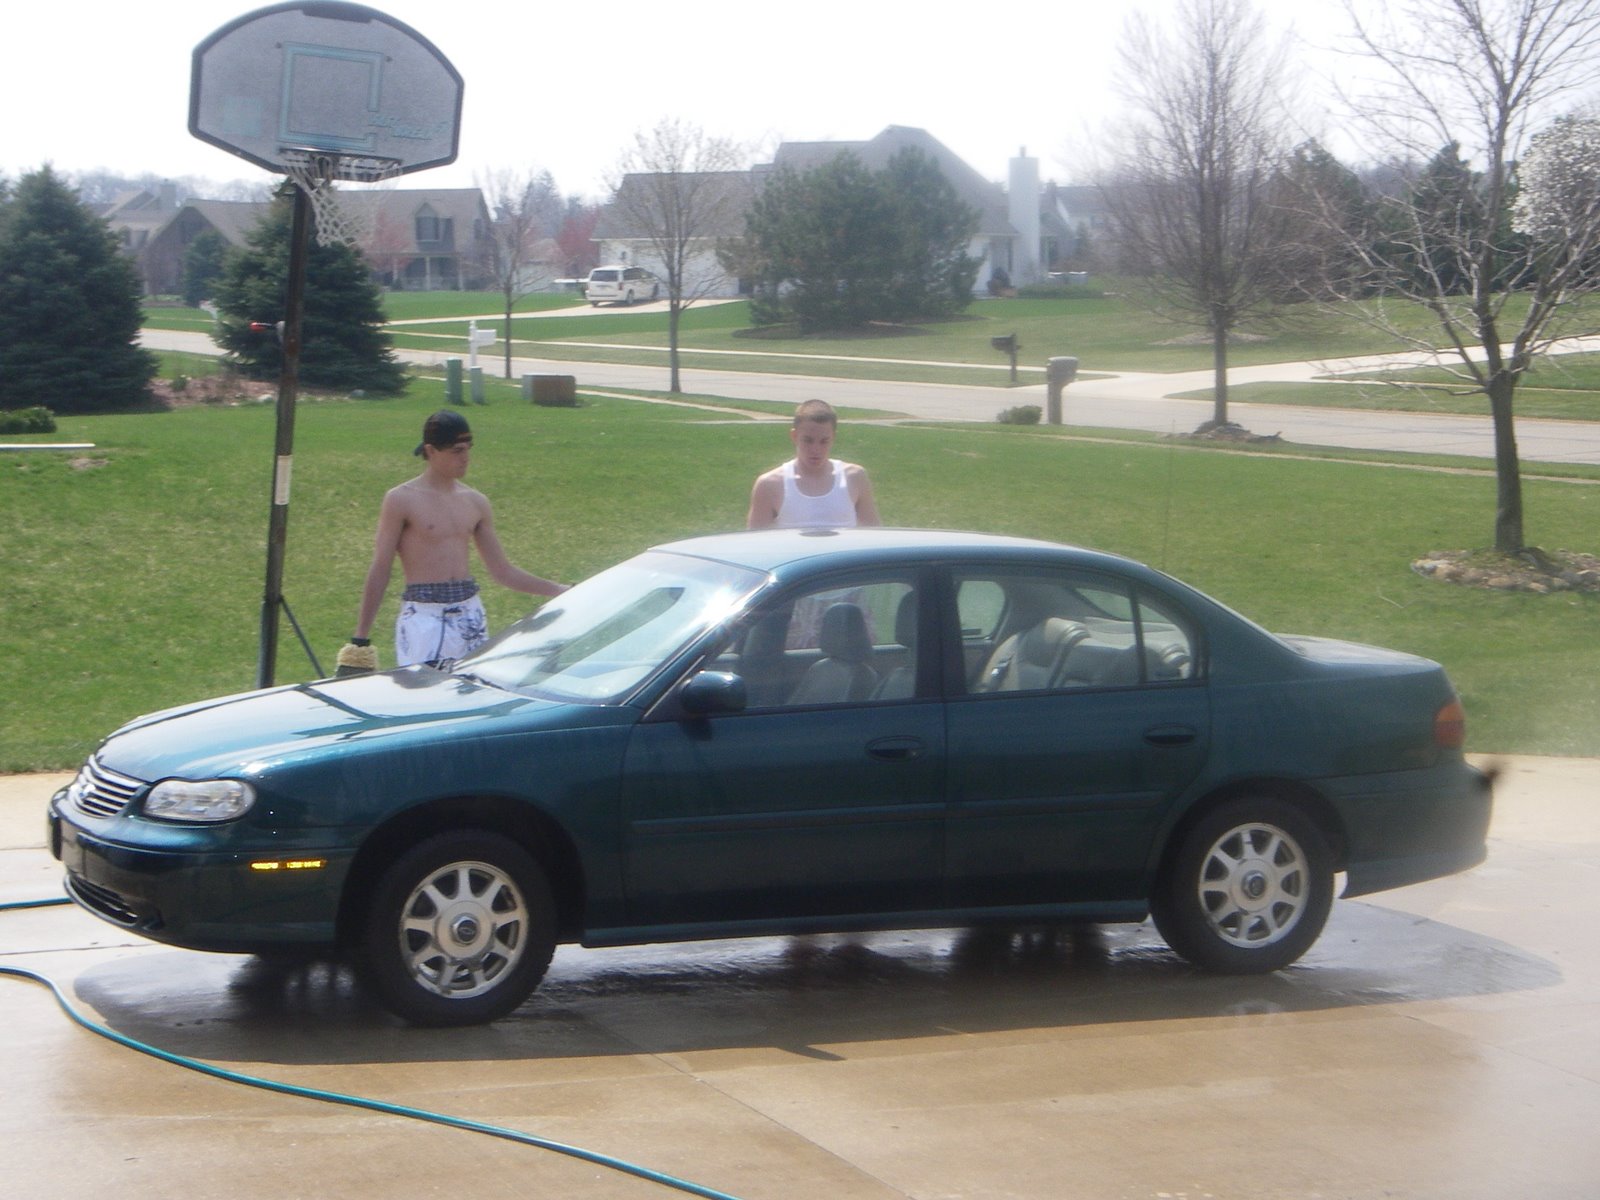 [Zach+lost+a+bet+to+his+dad+and+had+to+wash+the+car08+005.jpg]